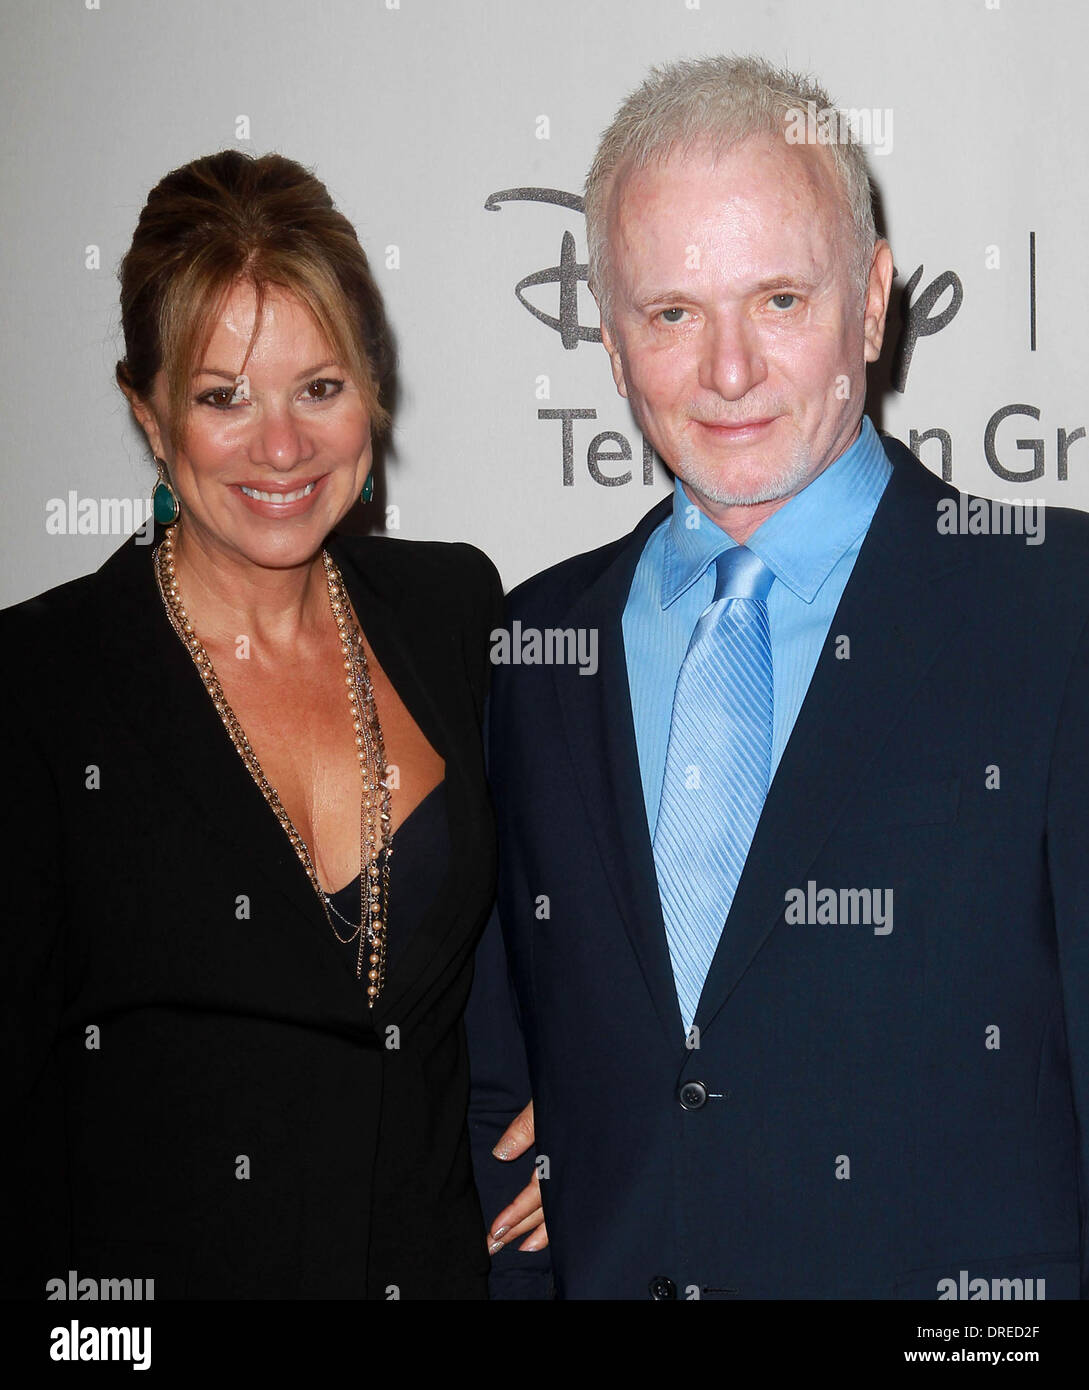 Nancy Lee Grahn and Anthony Geary 2012 TCA Summer Press Tour - Disney ABC Television Group Party held at The Beverly Hilton Hotel Beverly Hills, California - 27.07.12 Stock Photo